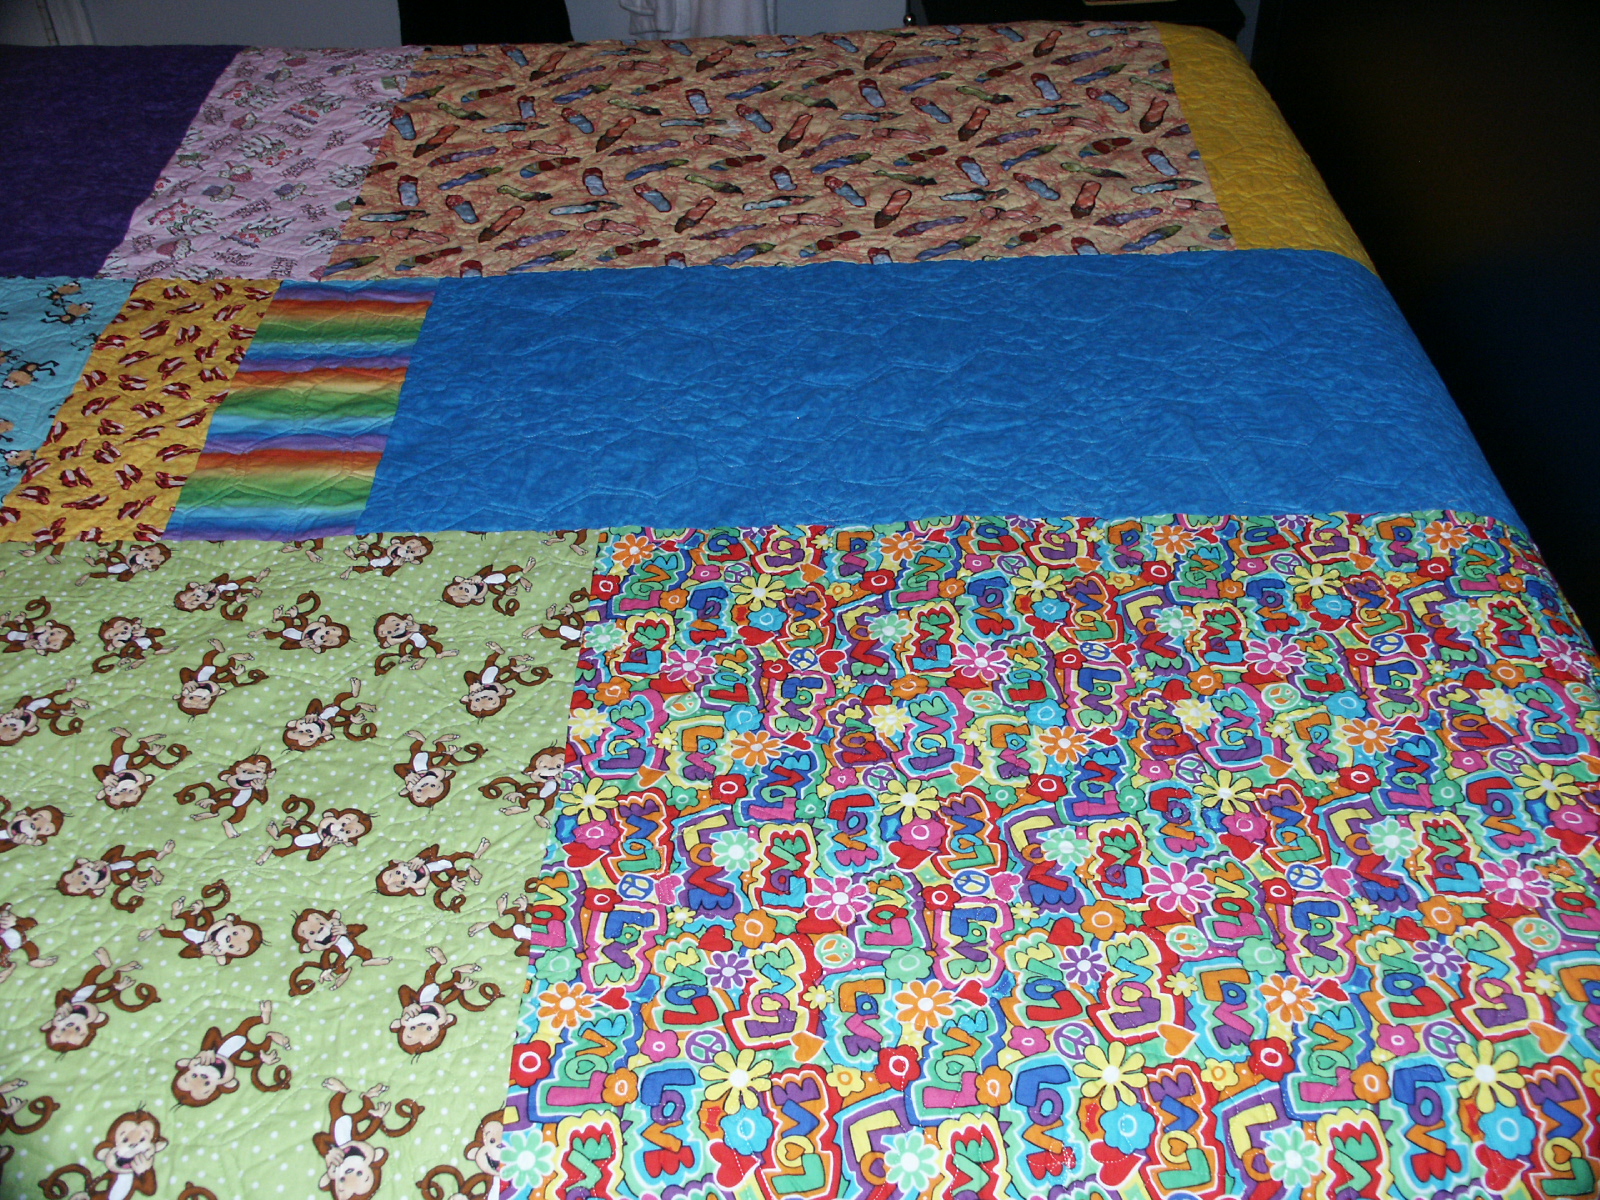 The Amateur Quilter: The Hexy Quilt is Finished!!!